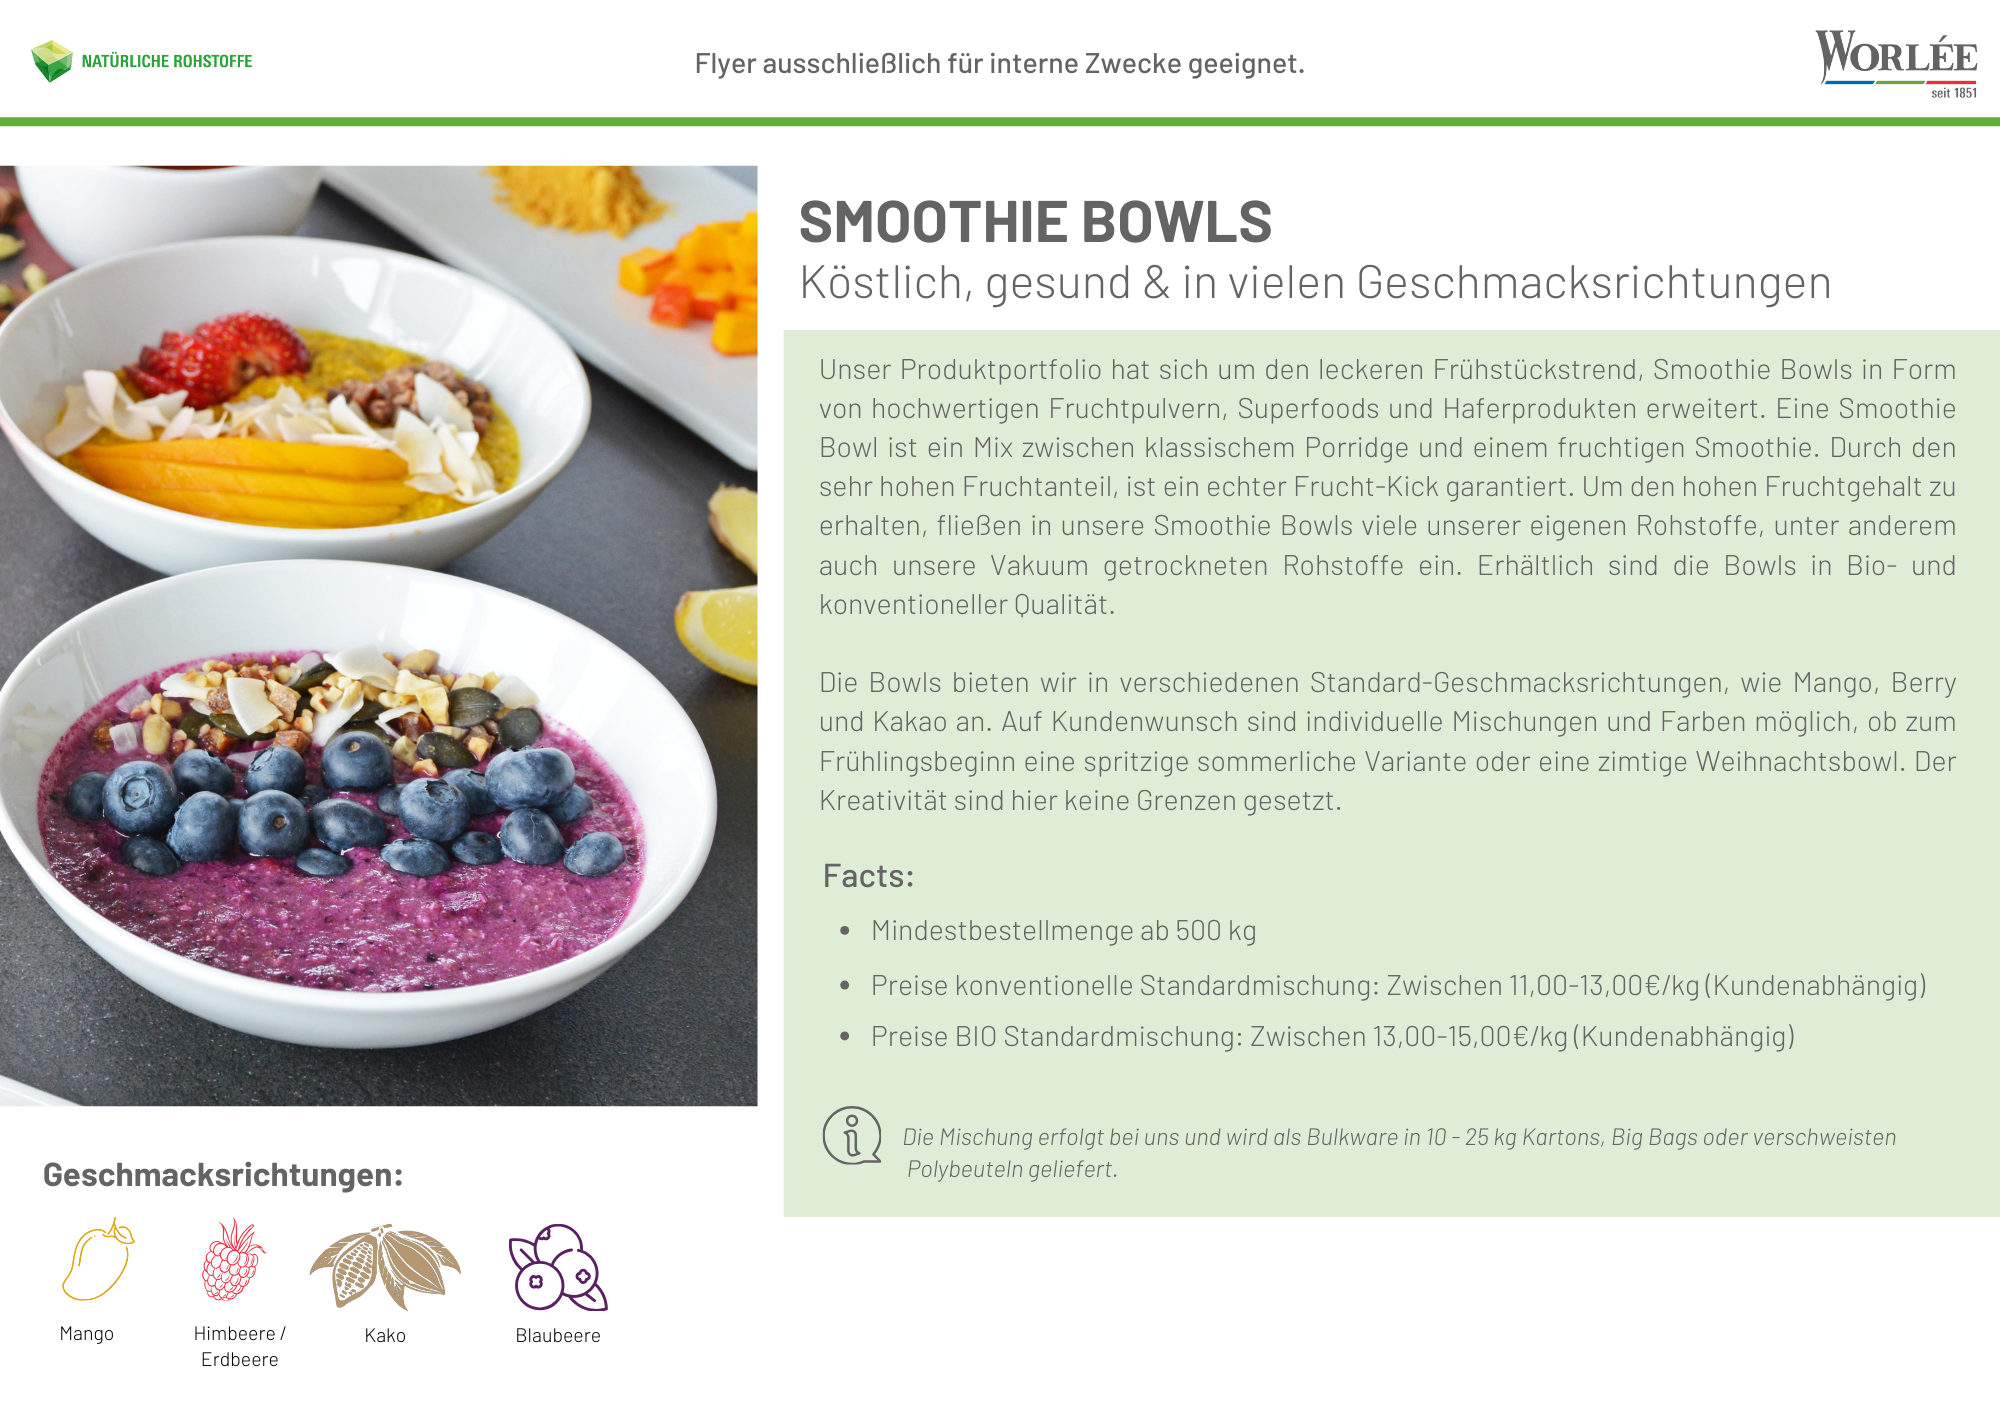 WNP Flyer Smoothie Bowls